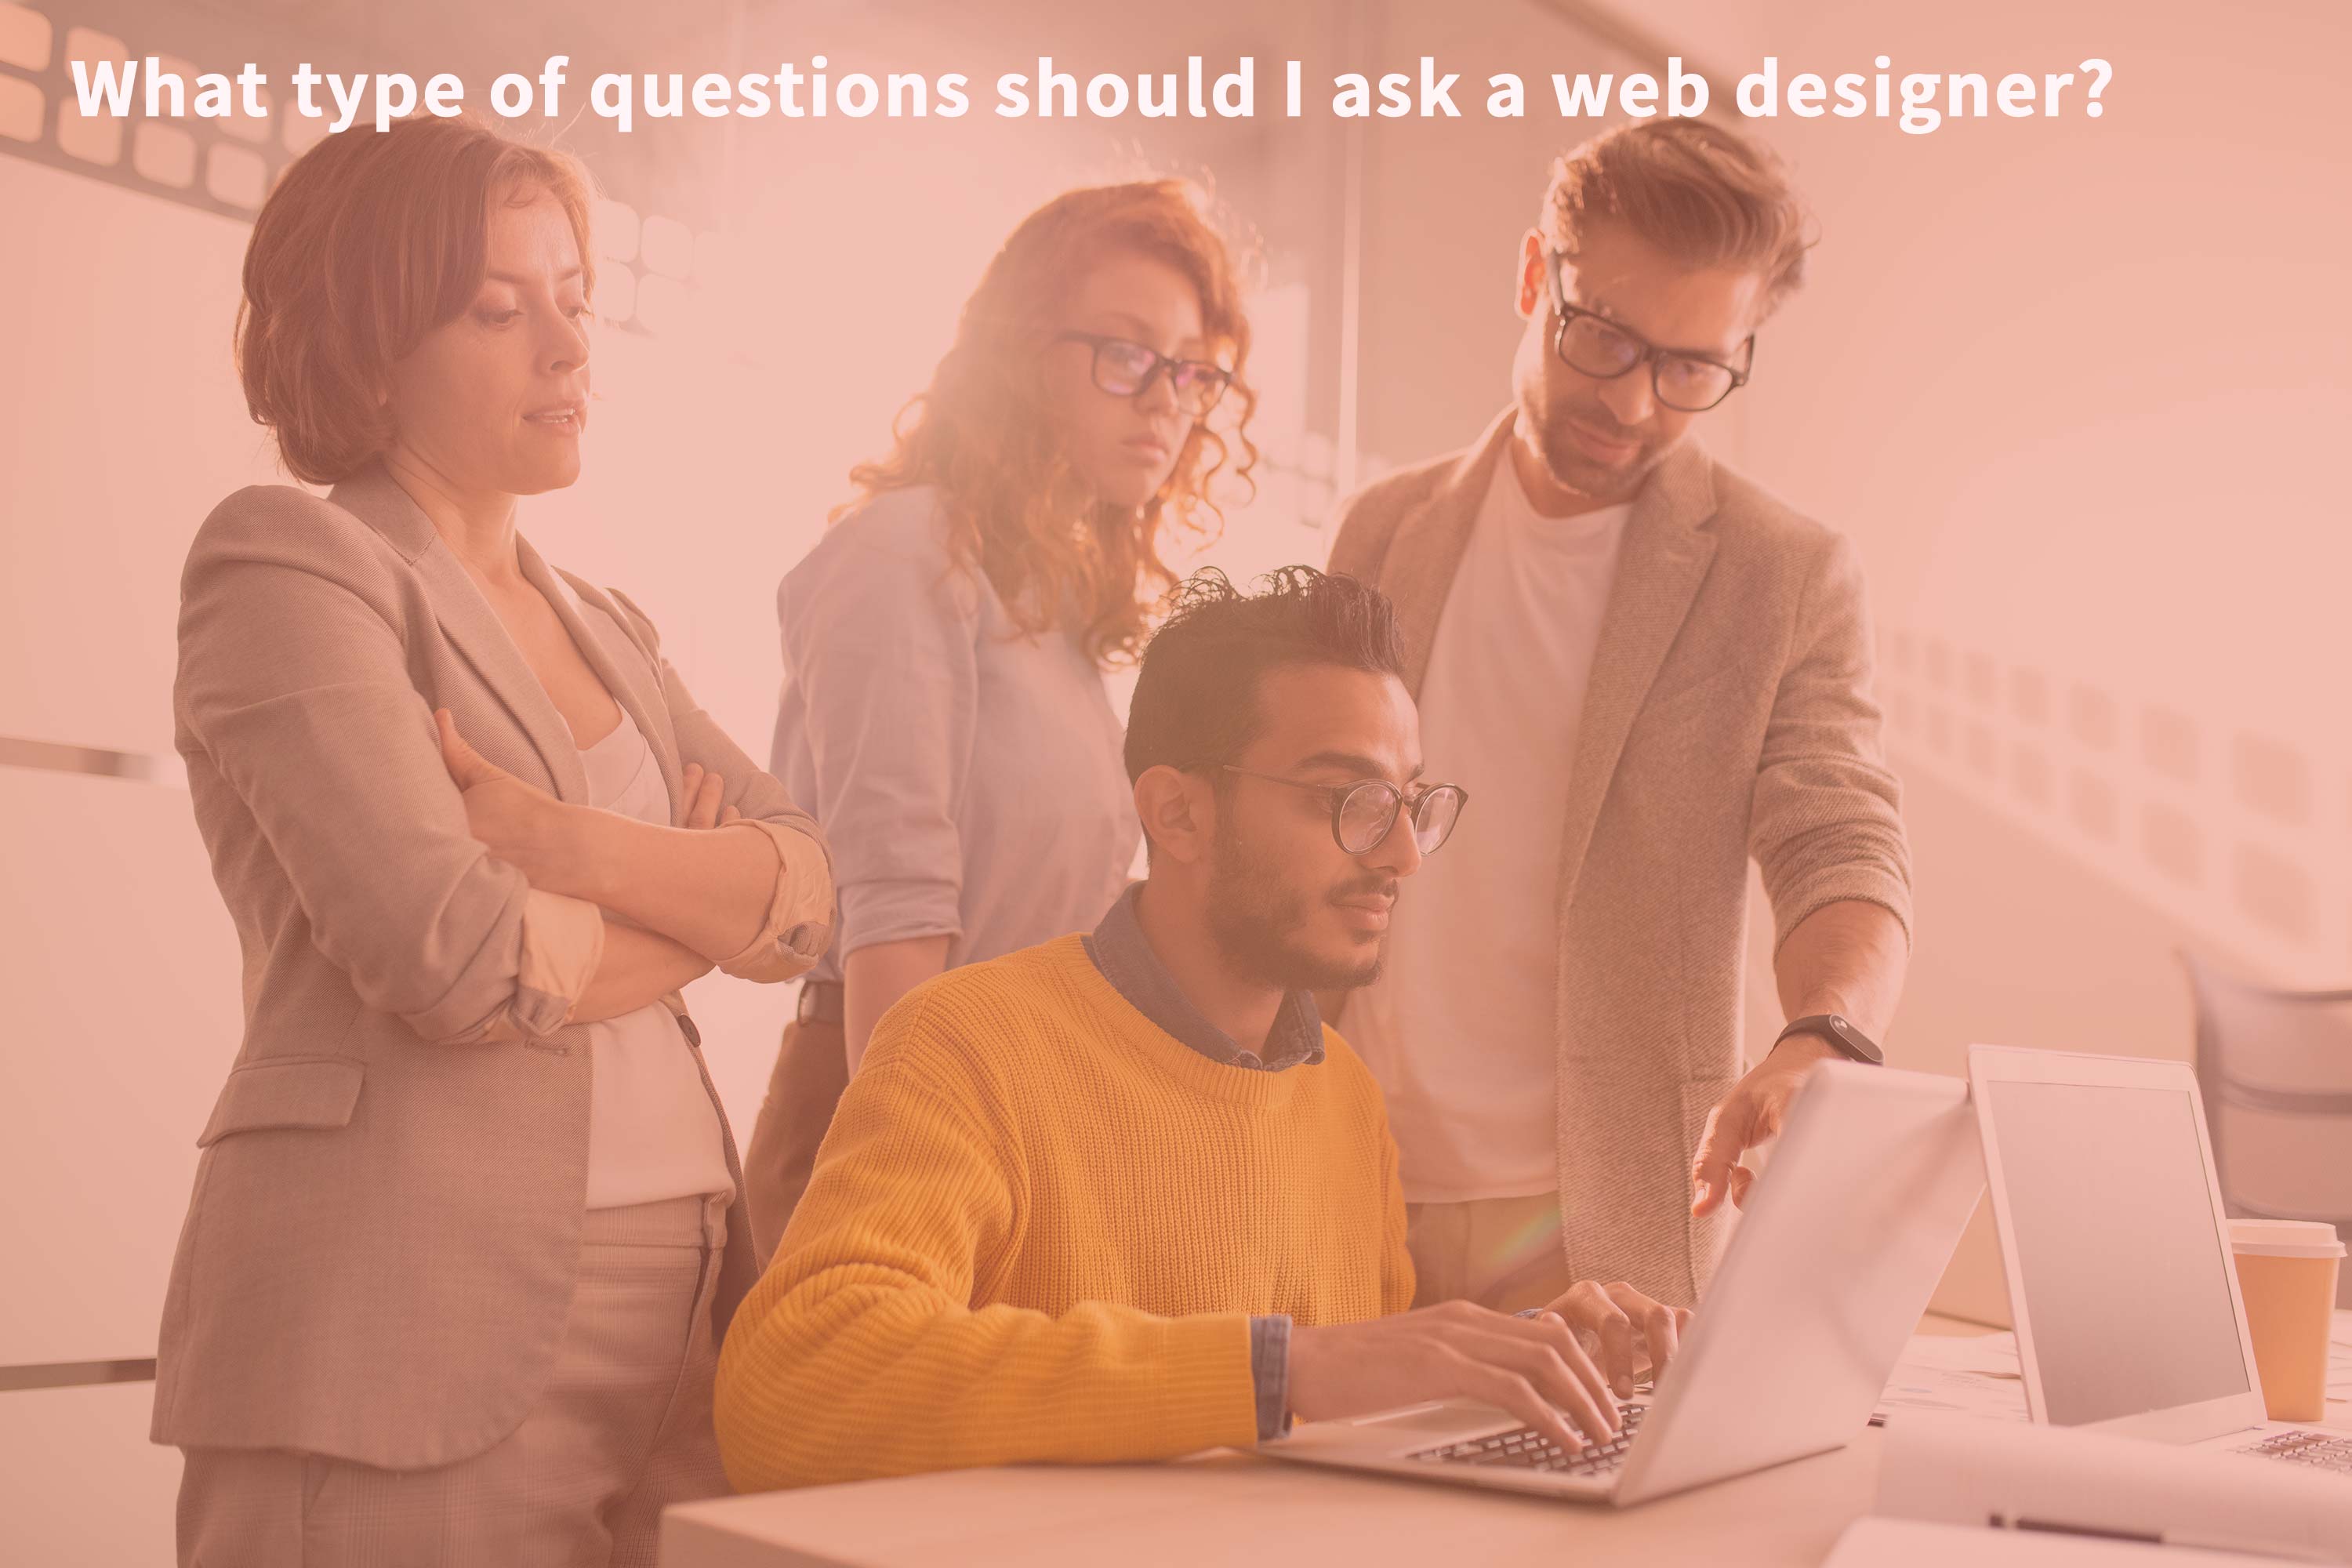 What type of questions should I ask a web designer?